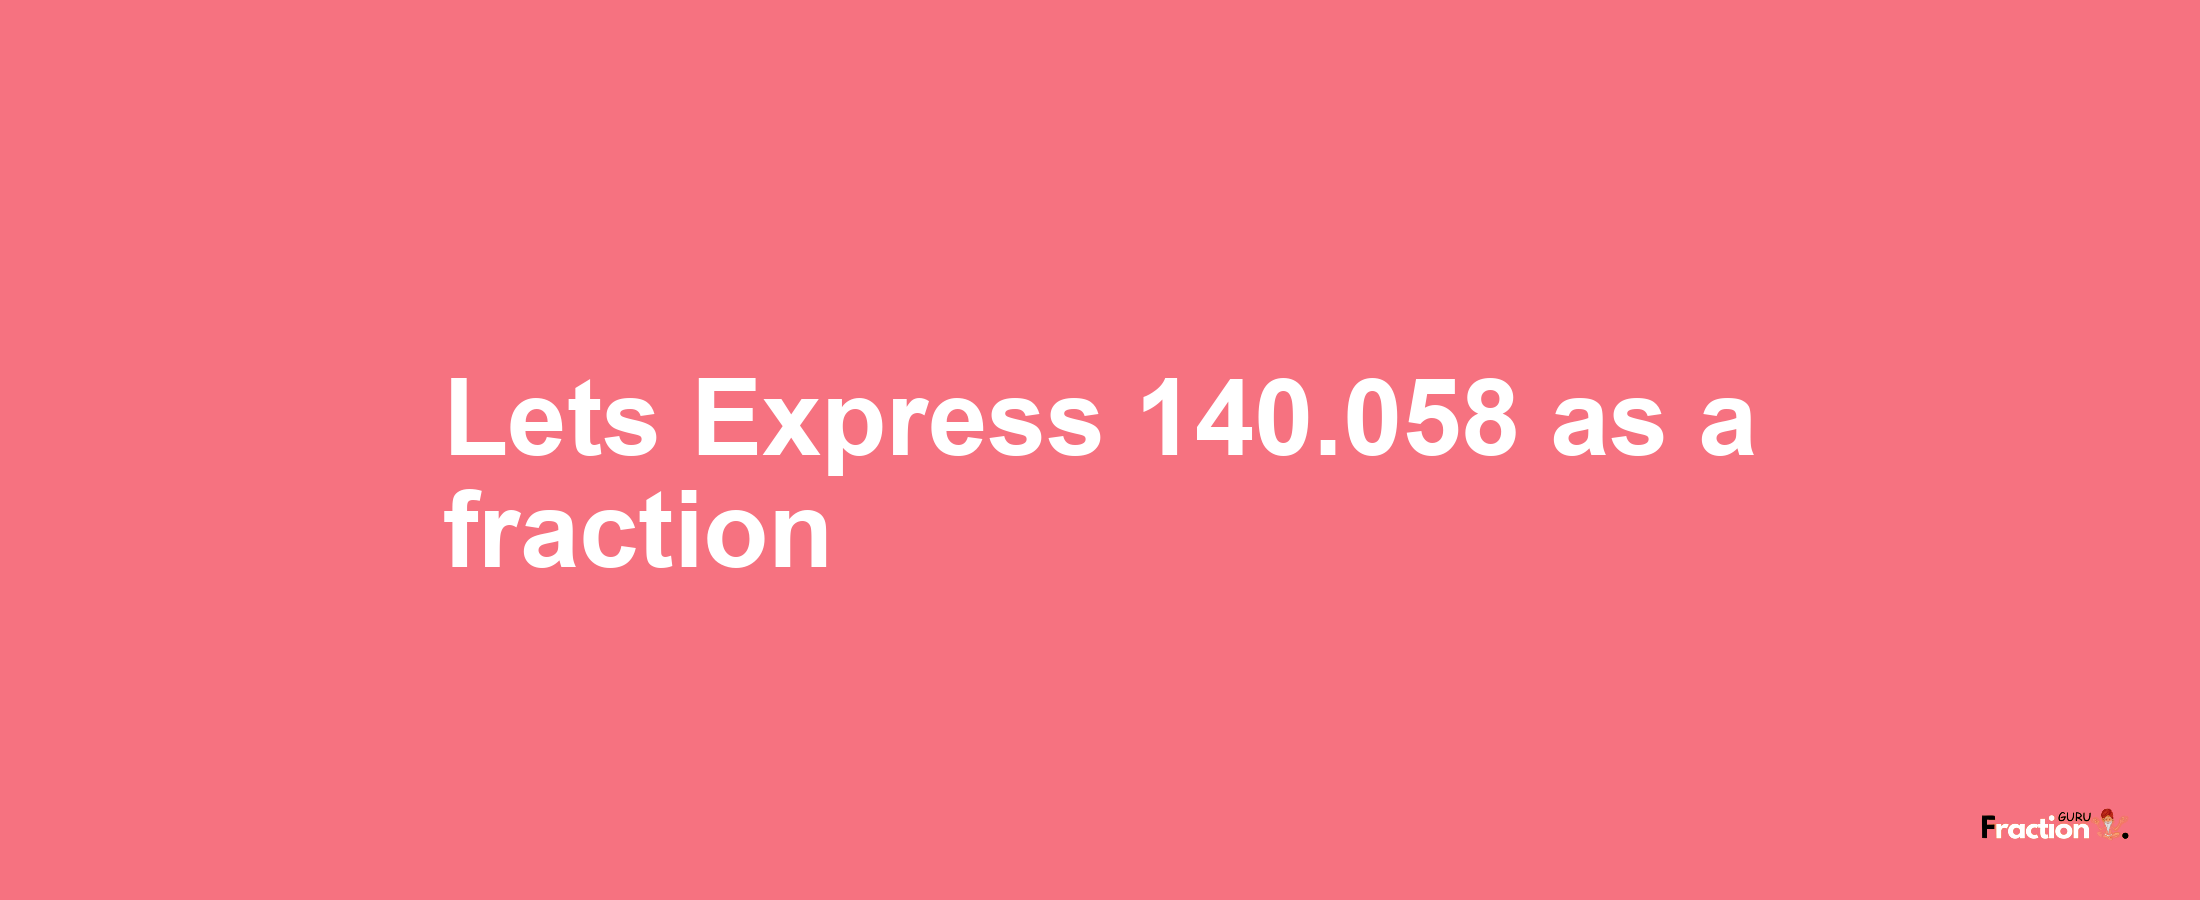 Lets Express 140.058 as afraction